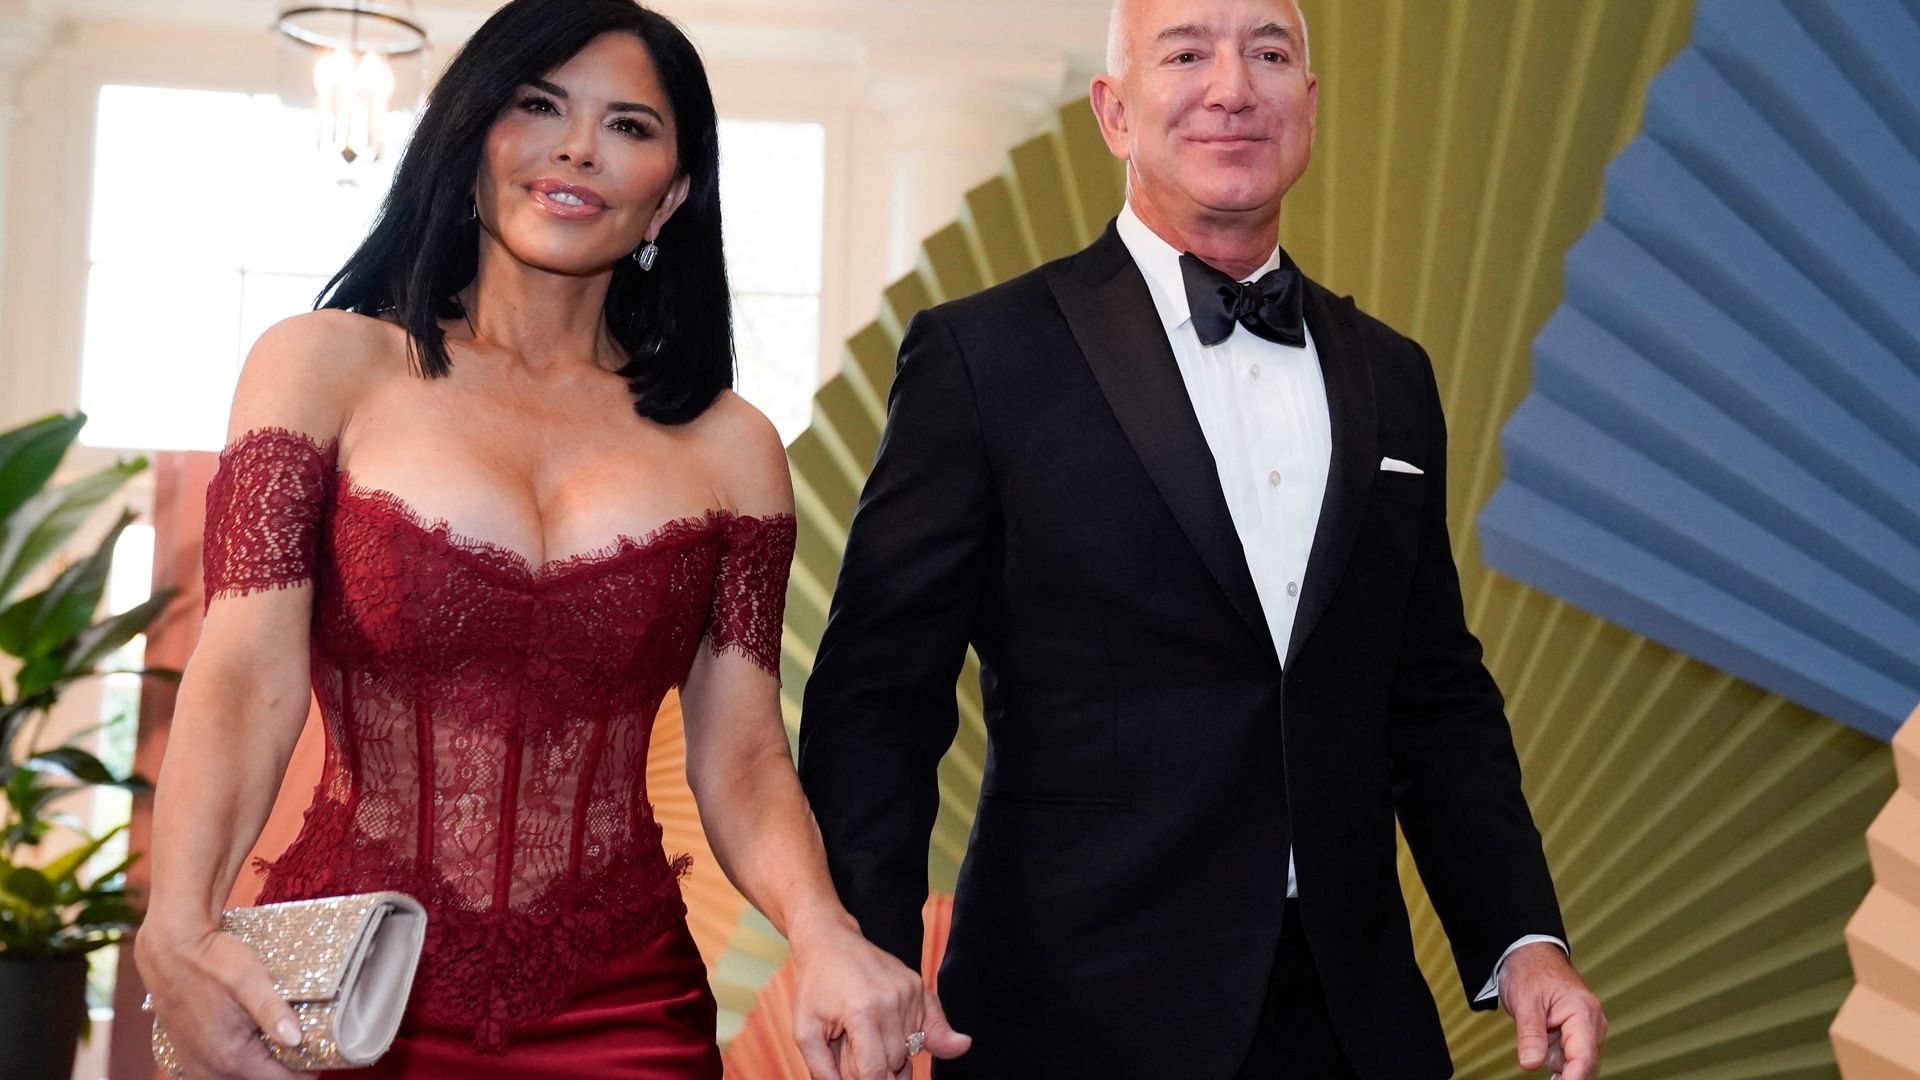 Lauren Sanchez dazzles in $2,200 gown as she and Jeff Bezos lead the ...